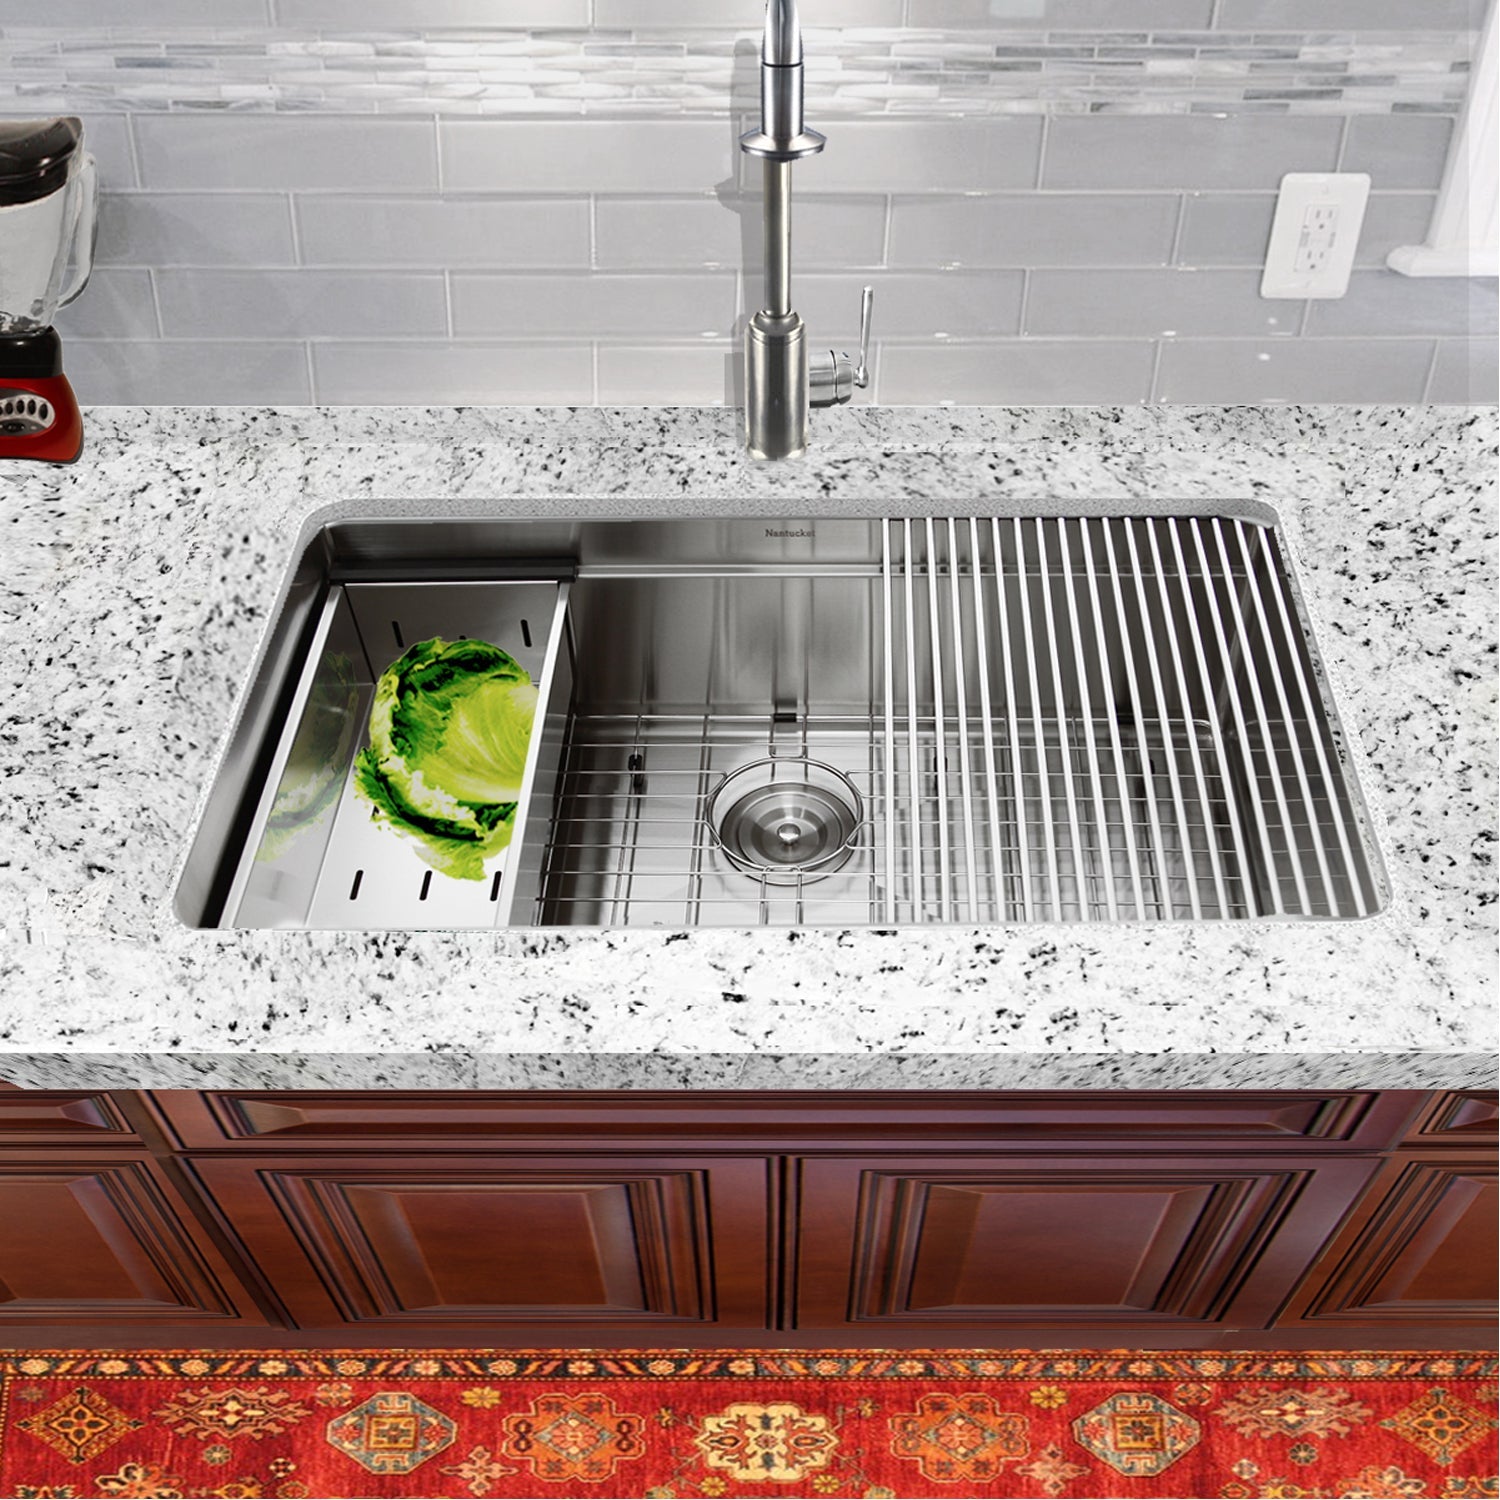 Nantucket Sinks SR-PS-3220-16 - 32" Professional Workstation Small Radius Undermount Stainless Kitchen Sink with Accessories